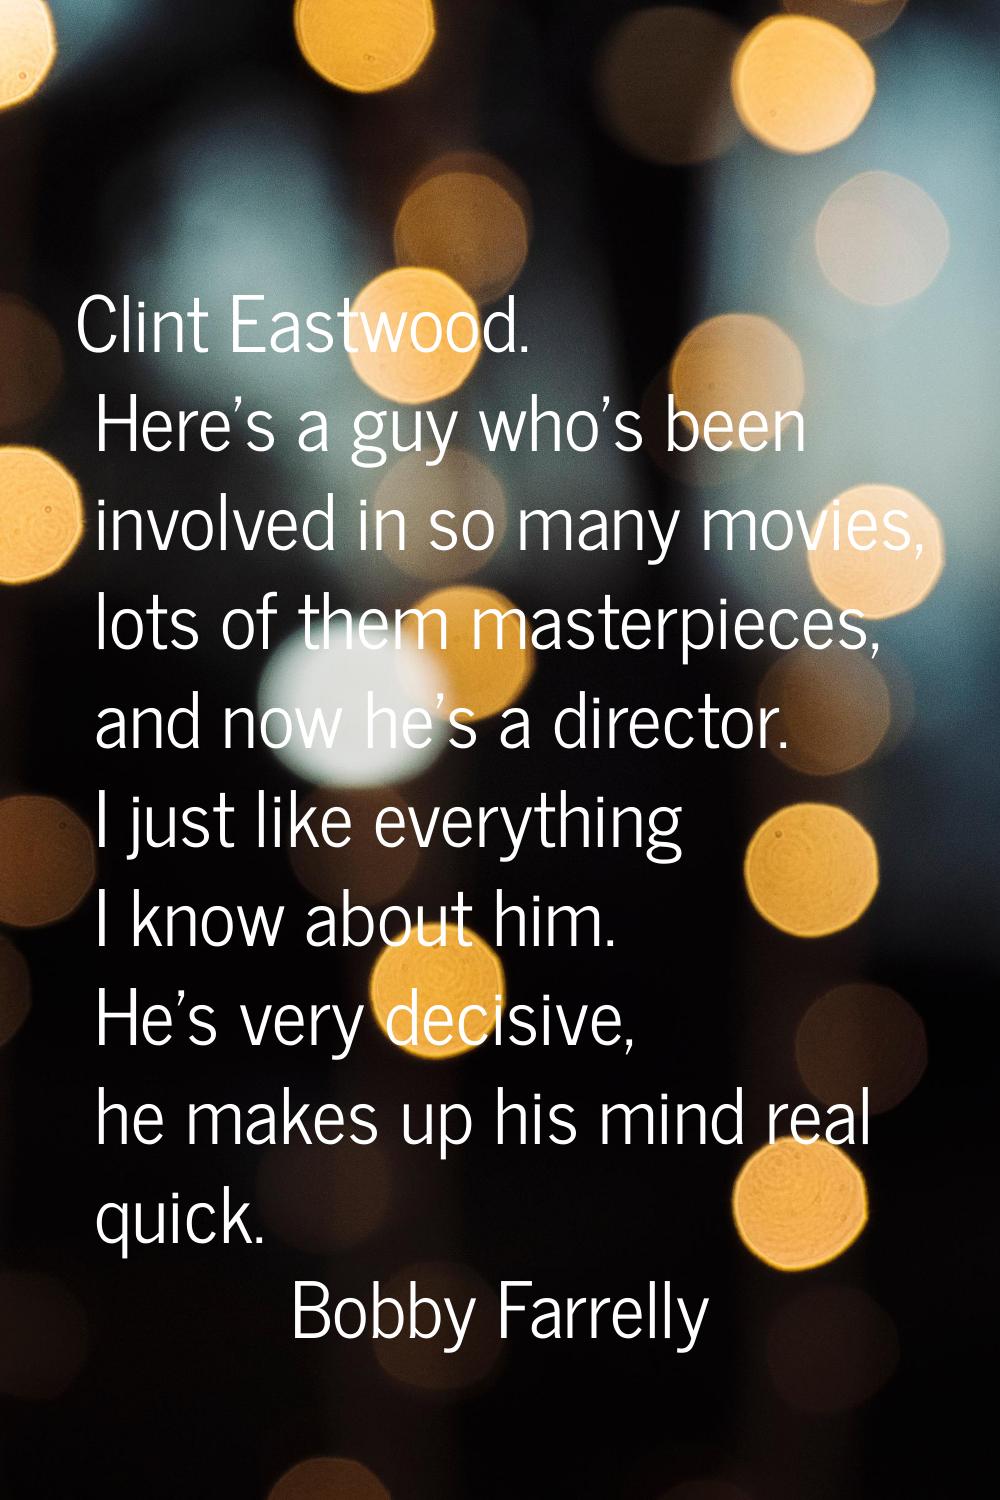 Clint Eastwood. Here's a guy who's been involved in so many movies, lots of them masterpieces, and 